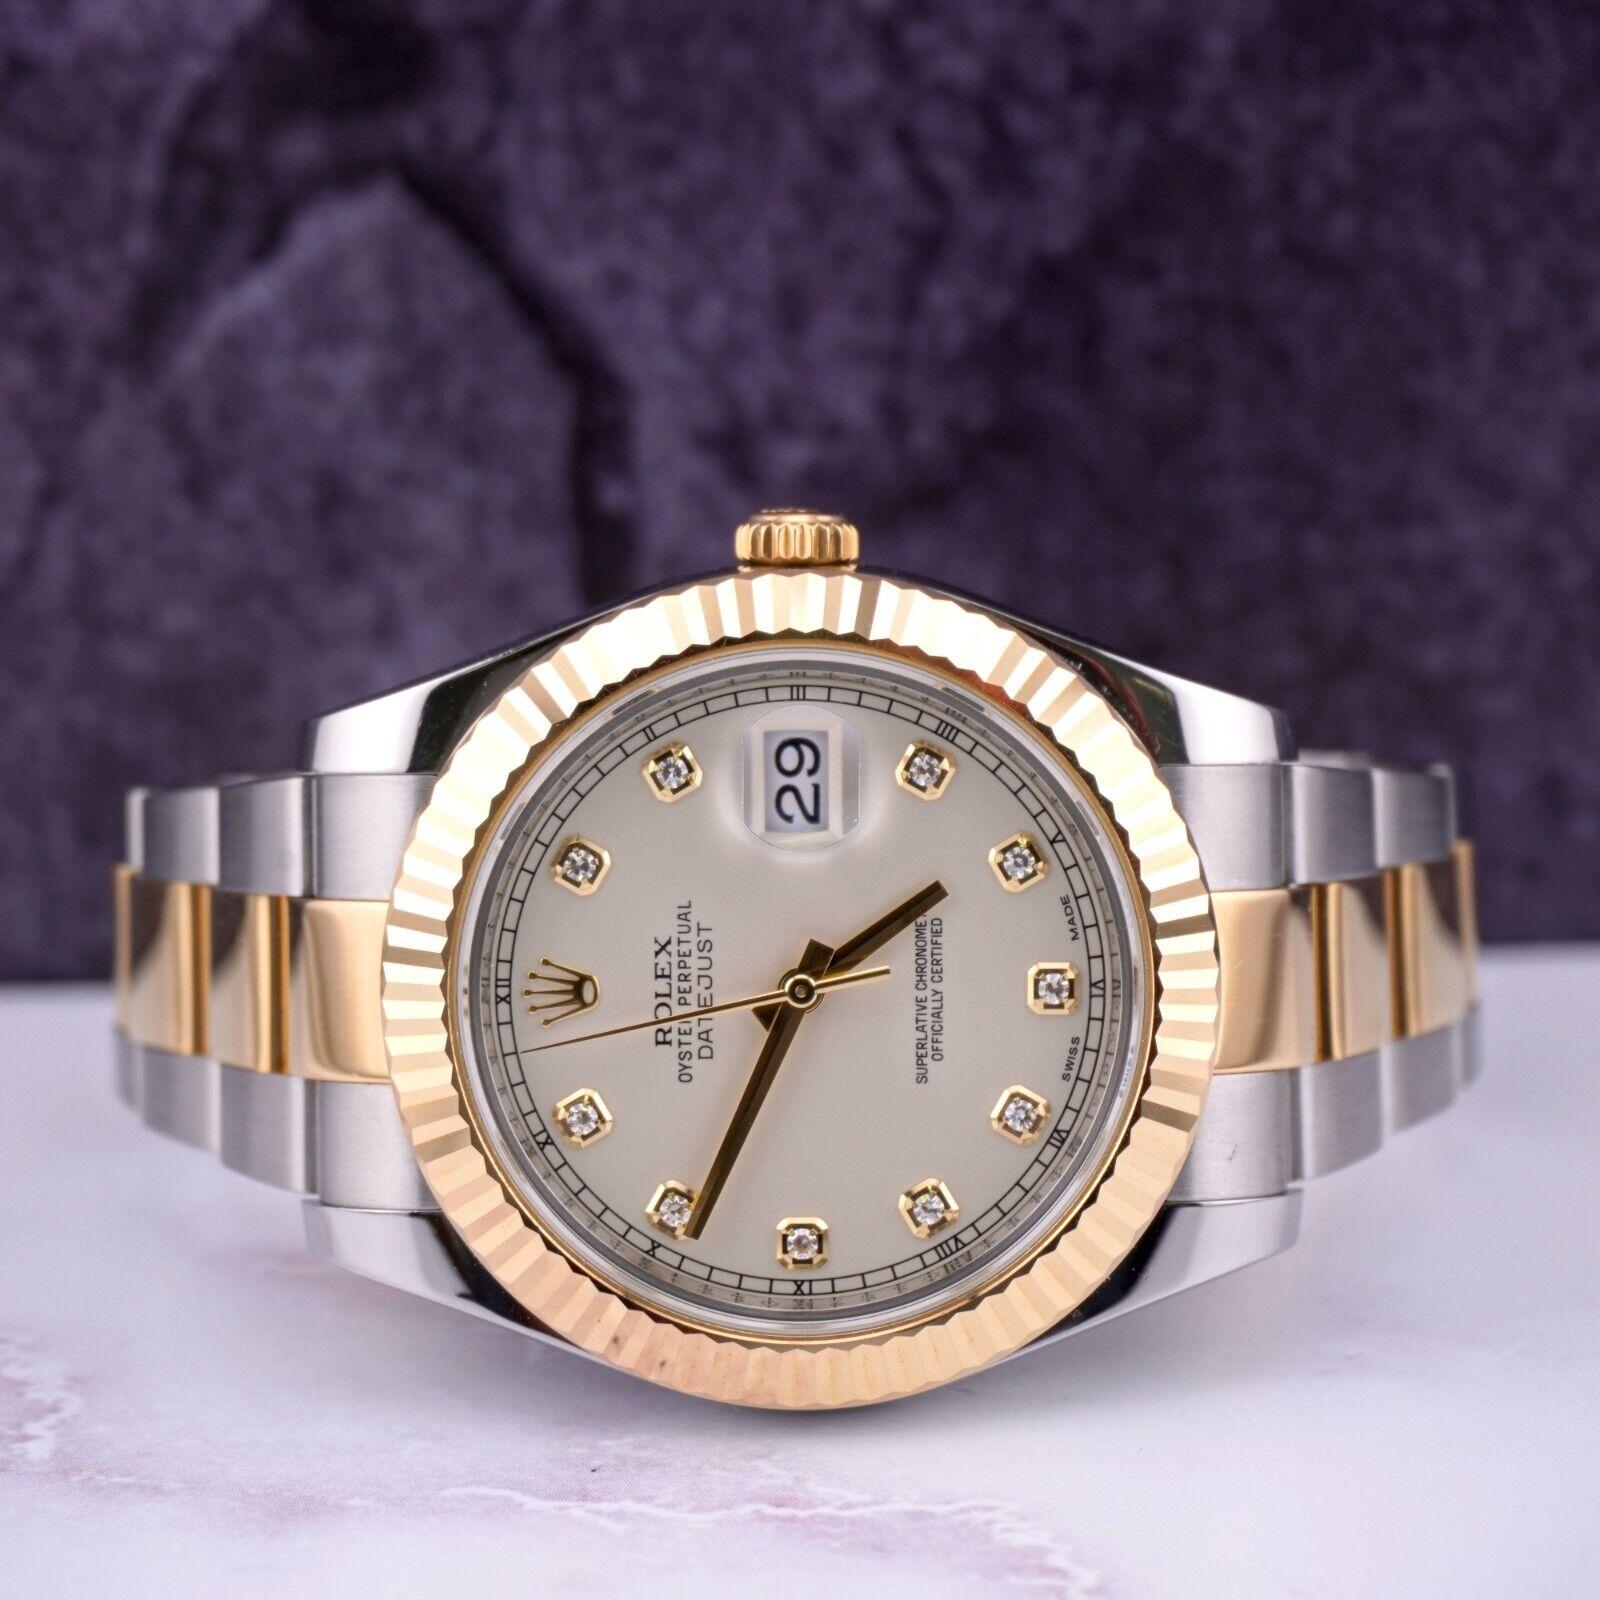 Rolex Datejust II 41mm Watch

Pre-owned w/ Original Box & Card
100% Authentic Authenticity Card
Condition - (GREAT Condition) - See Pics
Watch Reference - 116333
Model - Datejust ll
Dial Color - Ivory
Material - 18k Yellow Gold/Satinless Steel
Watch